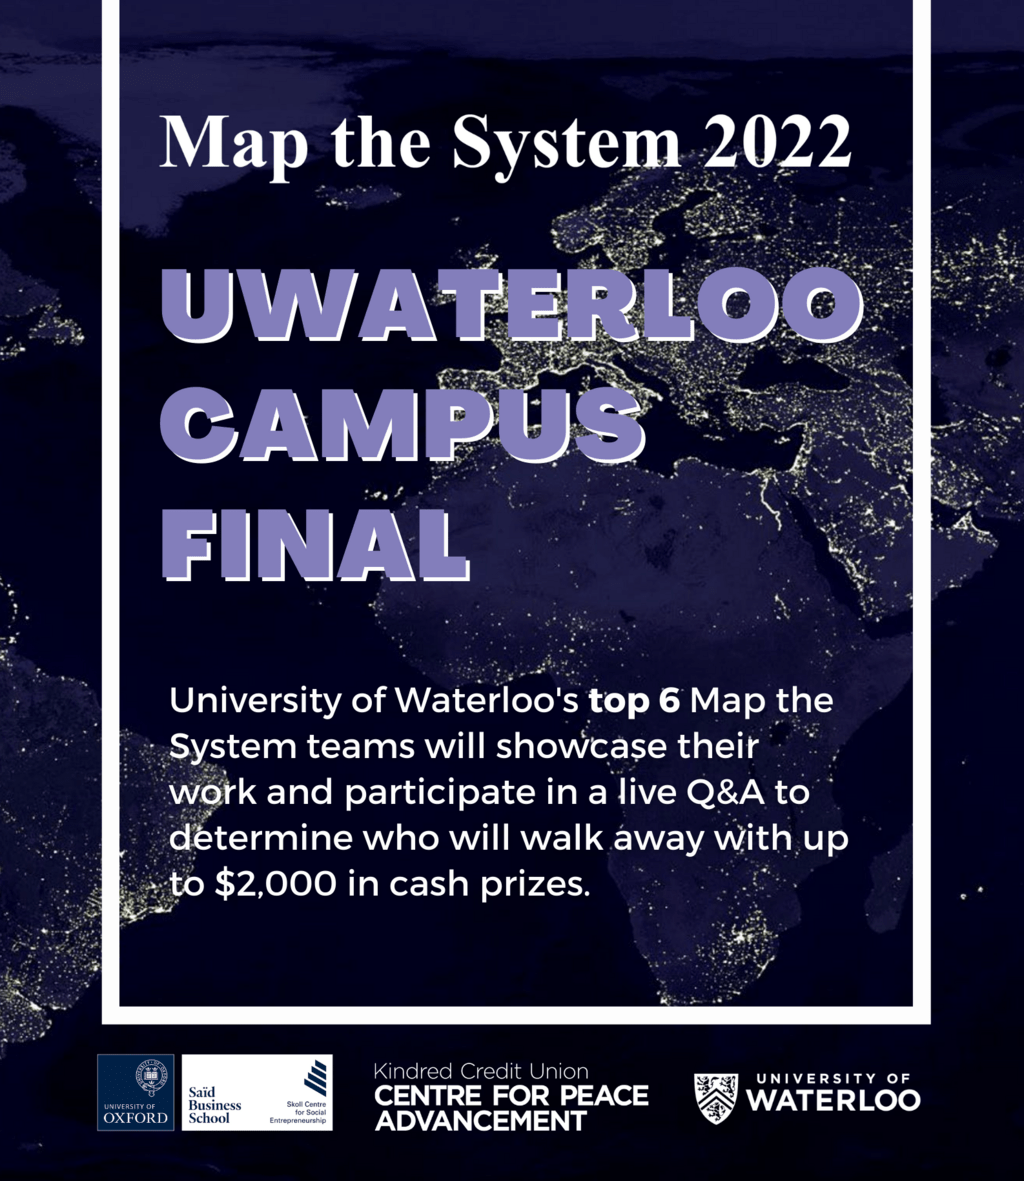 Map the System 2022 UWaterloo Campus Final April 7, 2022